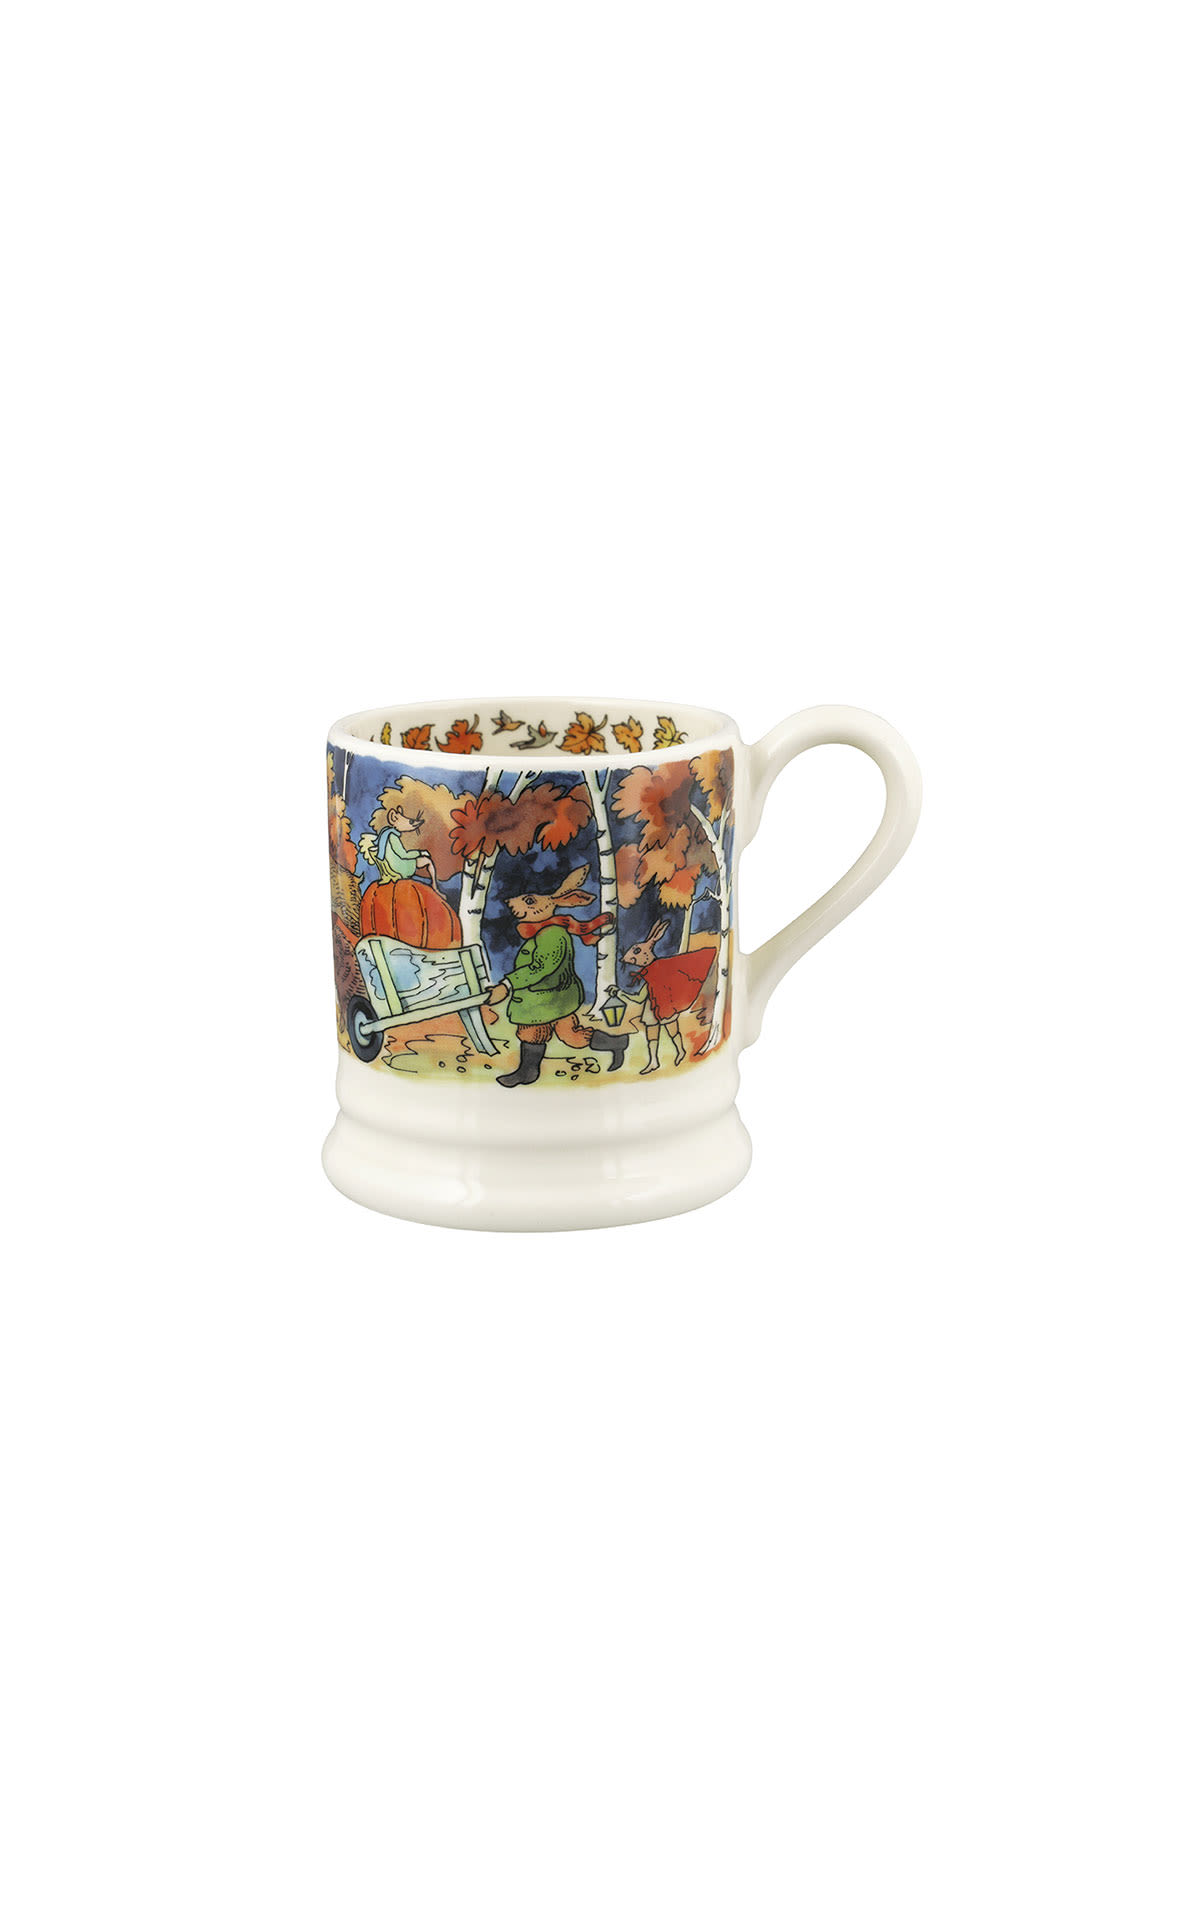 Emma Bridgewater Year in the country halloween half pint mug from Bicester Village